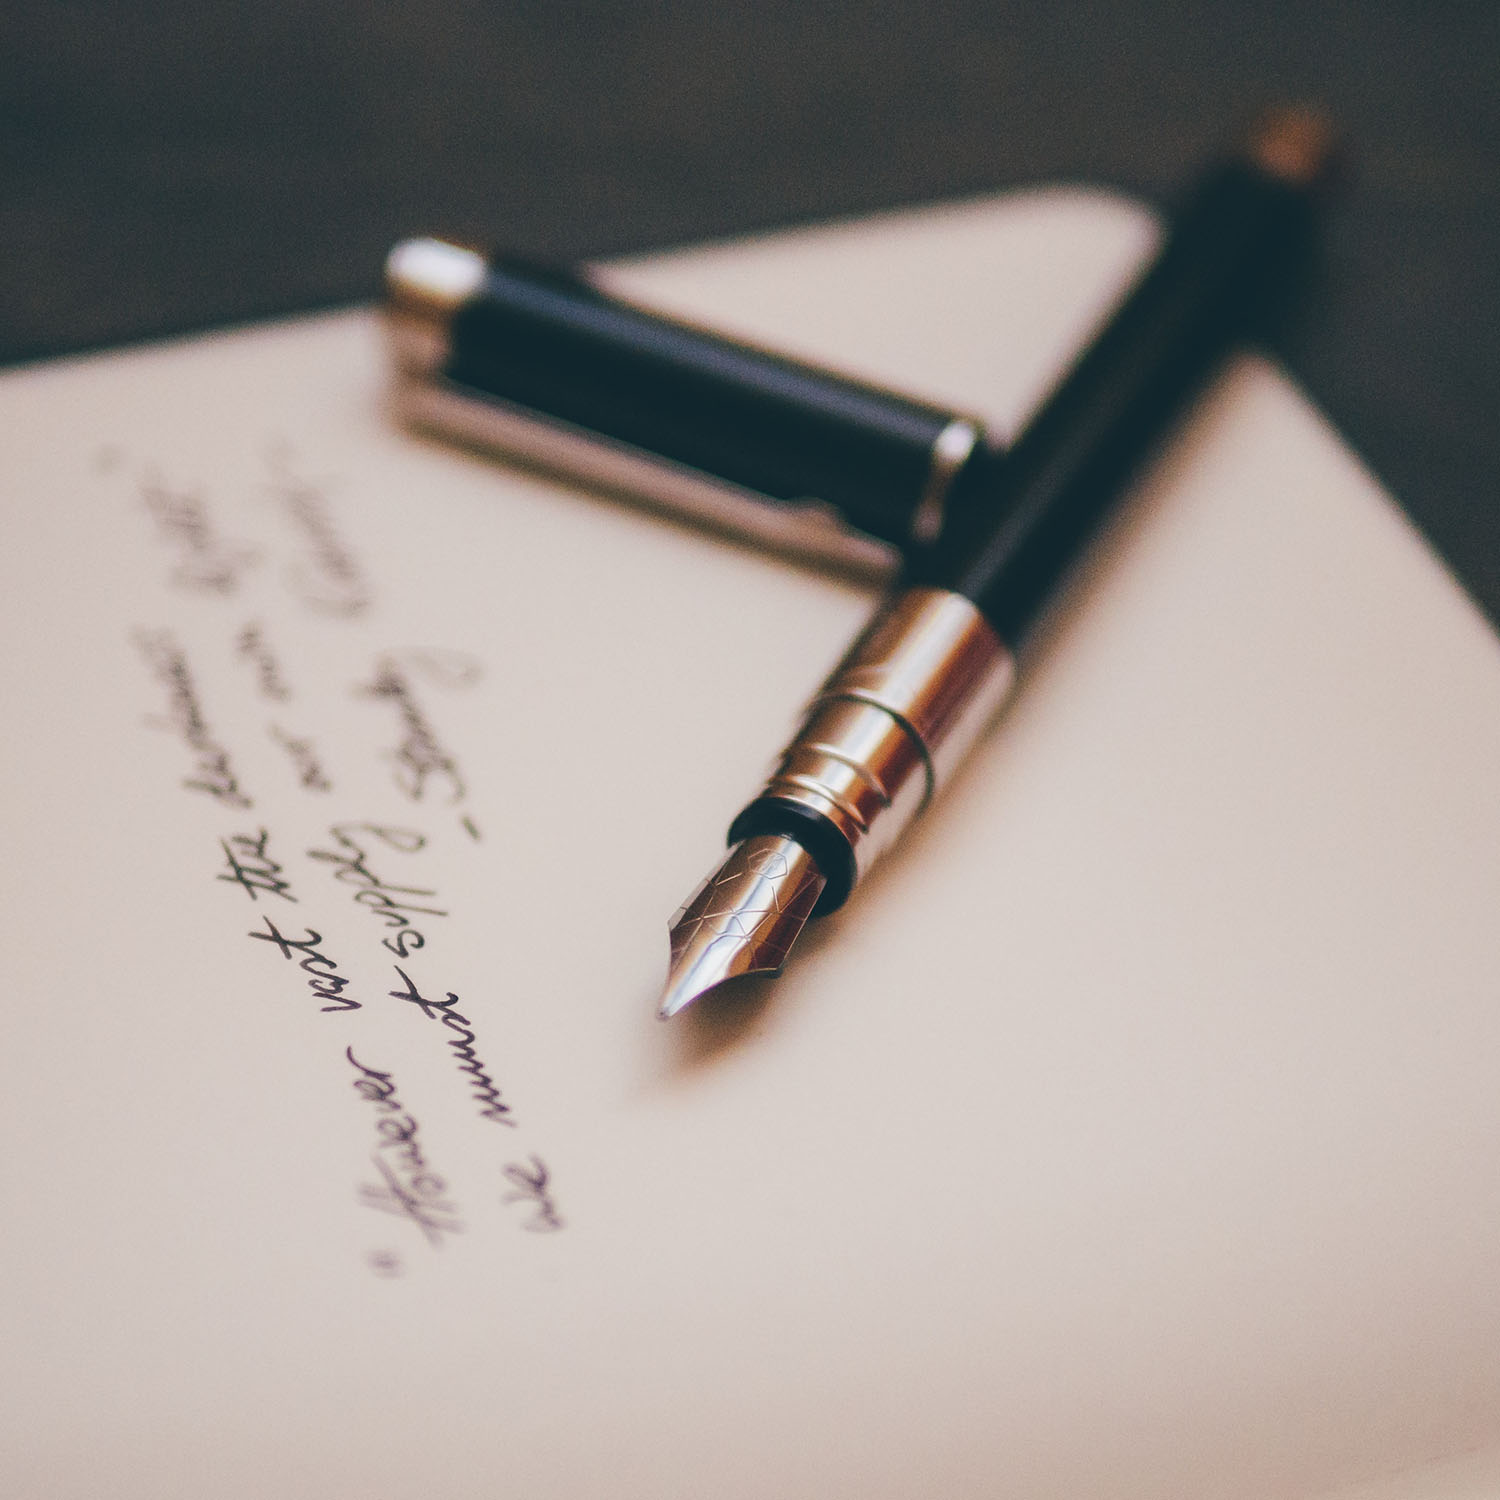 Image of a fountain pen and paper